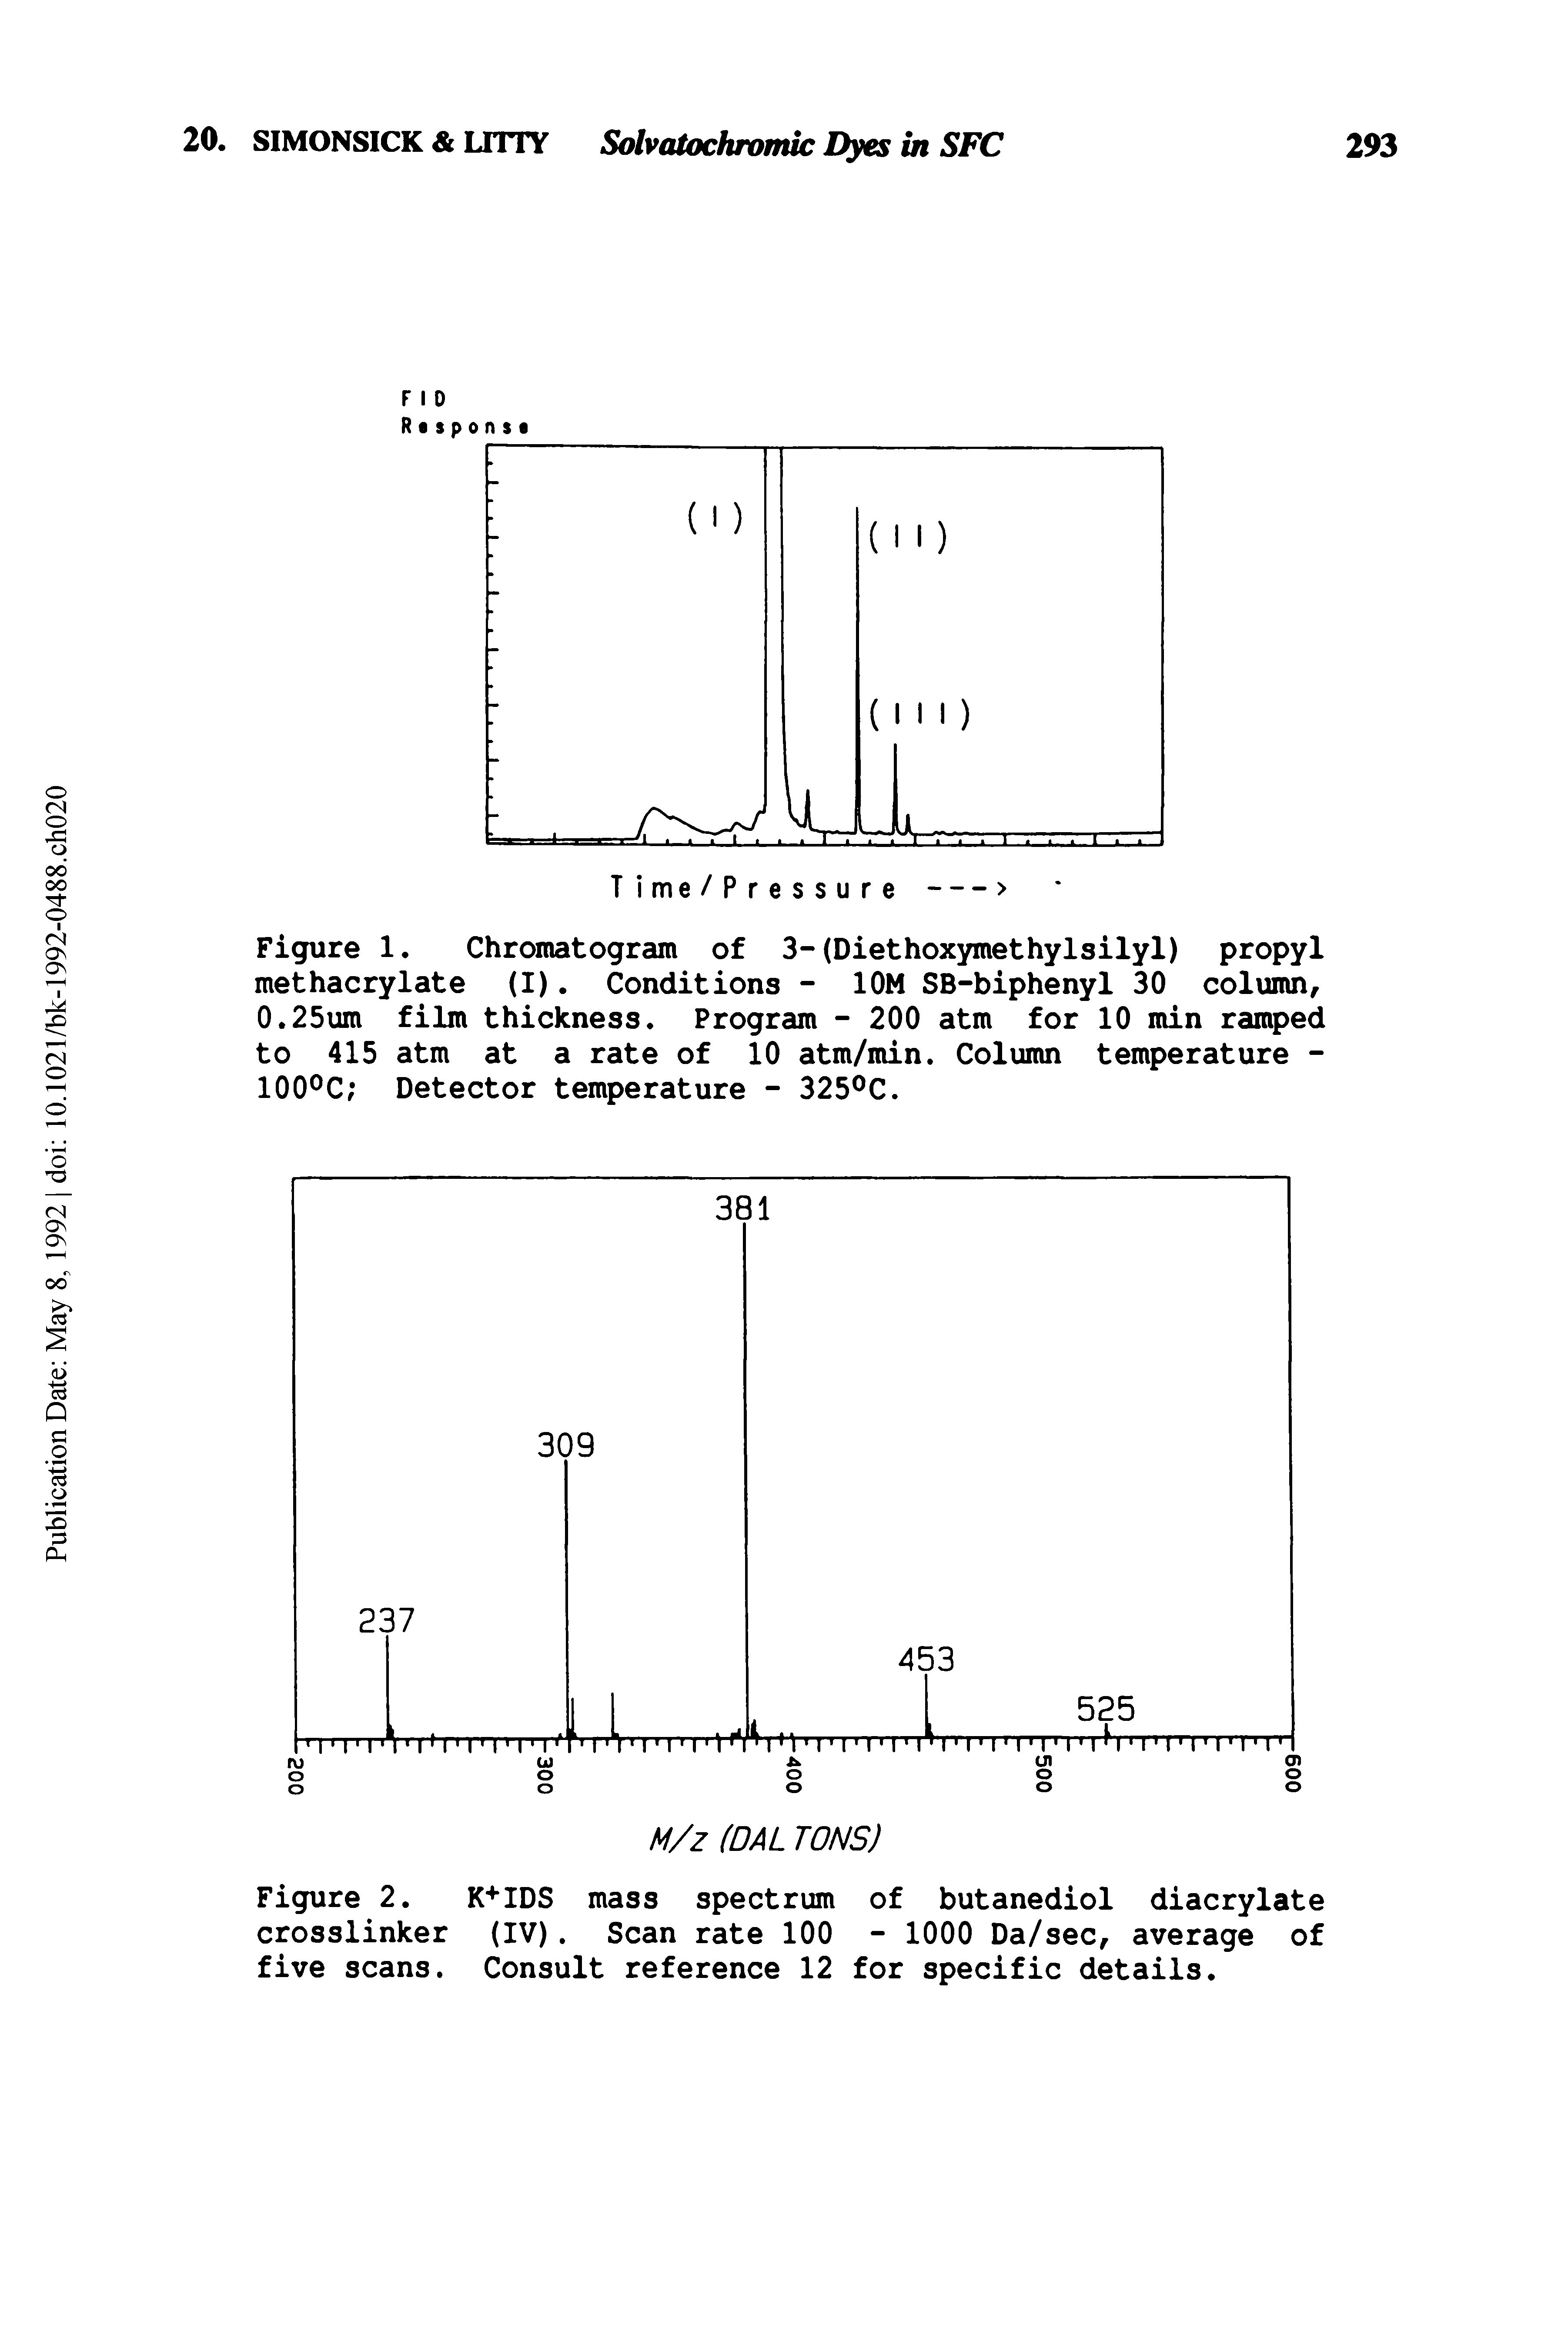 Figure 2. K+IDS mass spectrum of butanediol diacrylate crosslinker (IV). Scan rate 100 - 1000 Da/sec, average of five scans. Consult reference 12 for specific details.